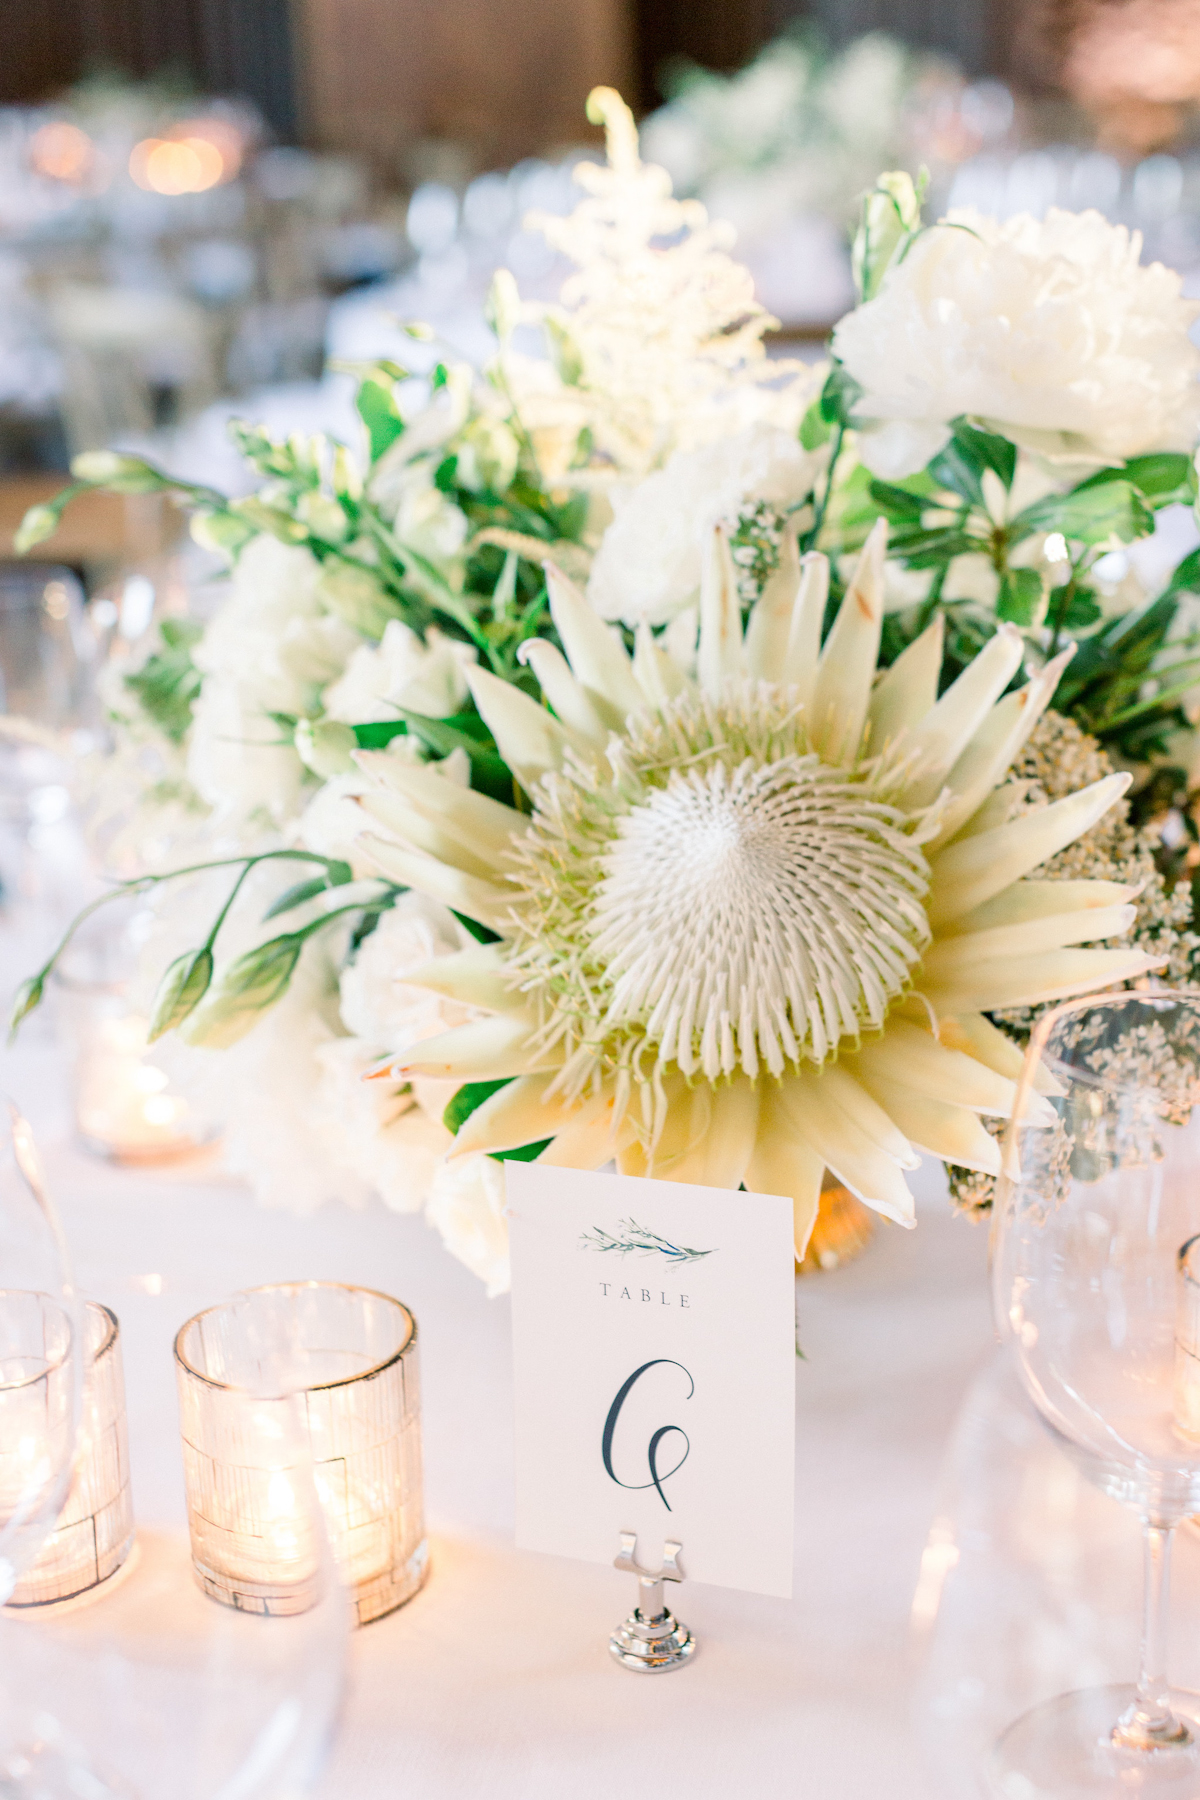 Blue Hill at Stone Barns wedding table number sign and white protea floral centerpiece